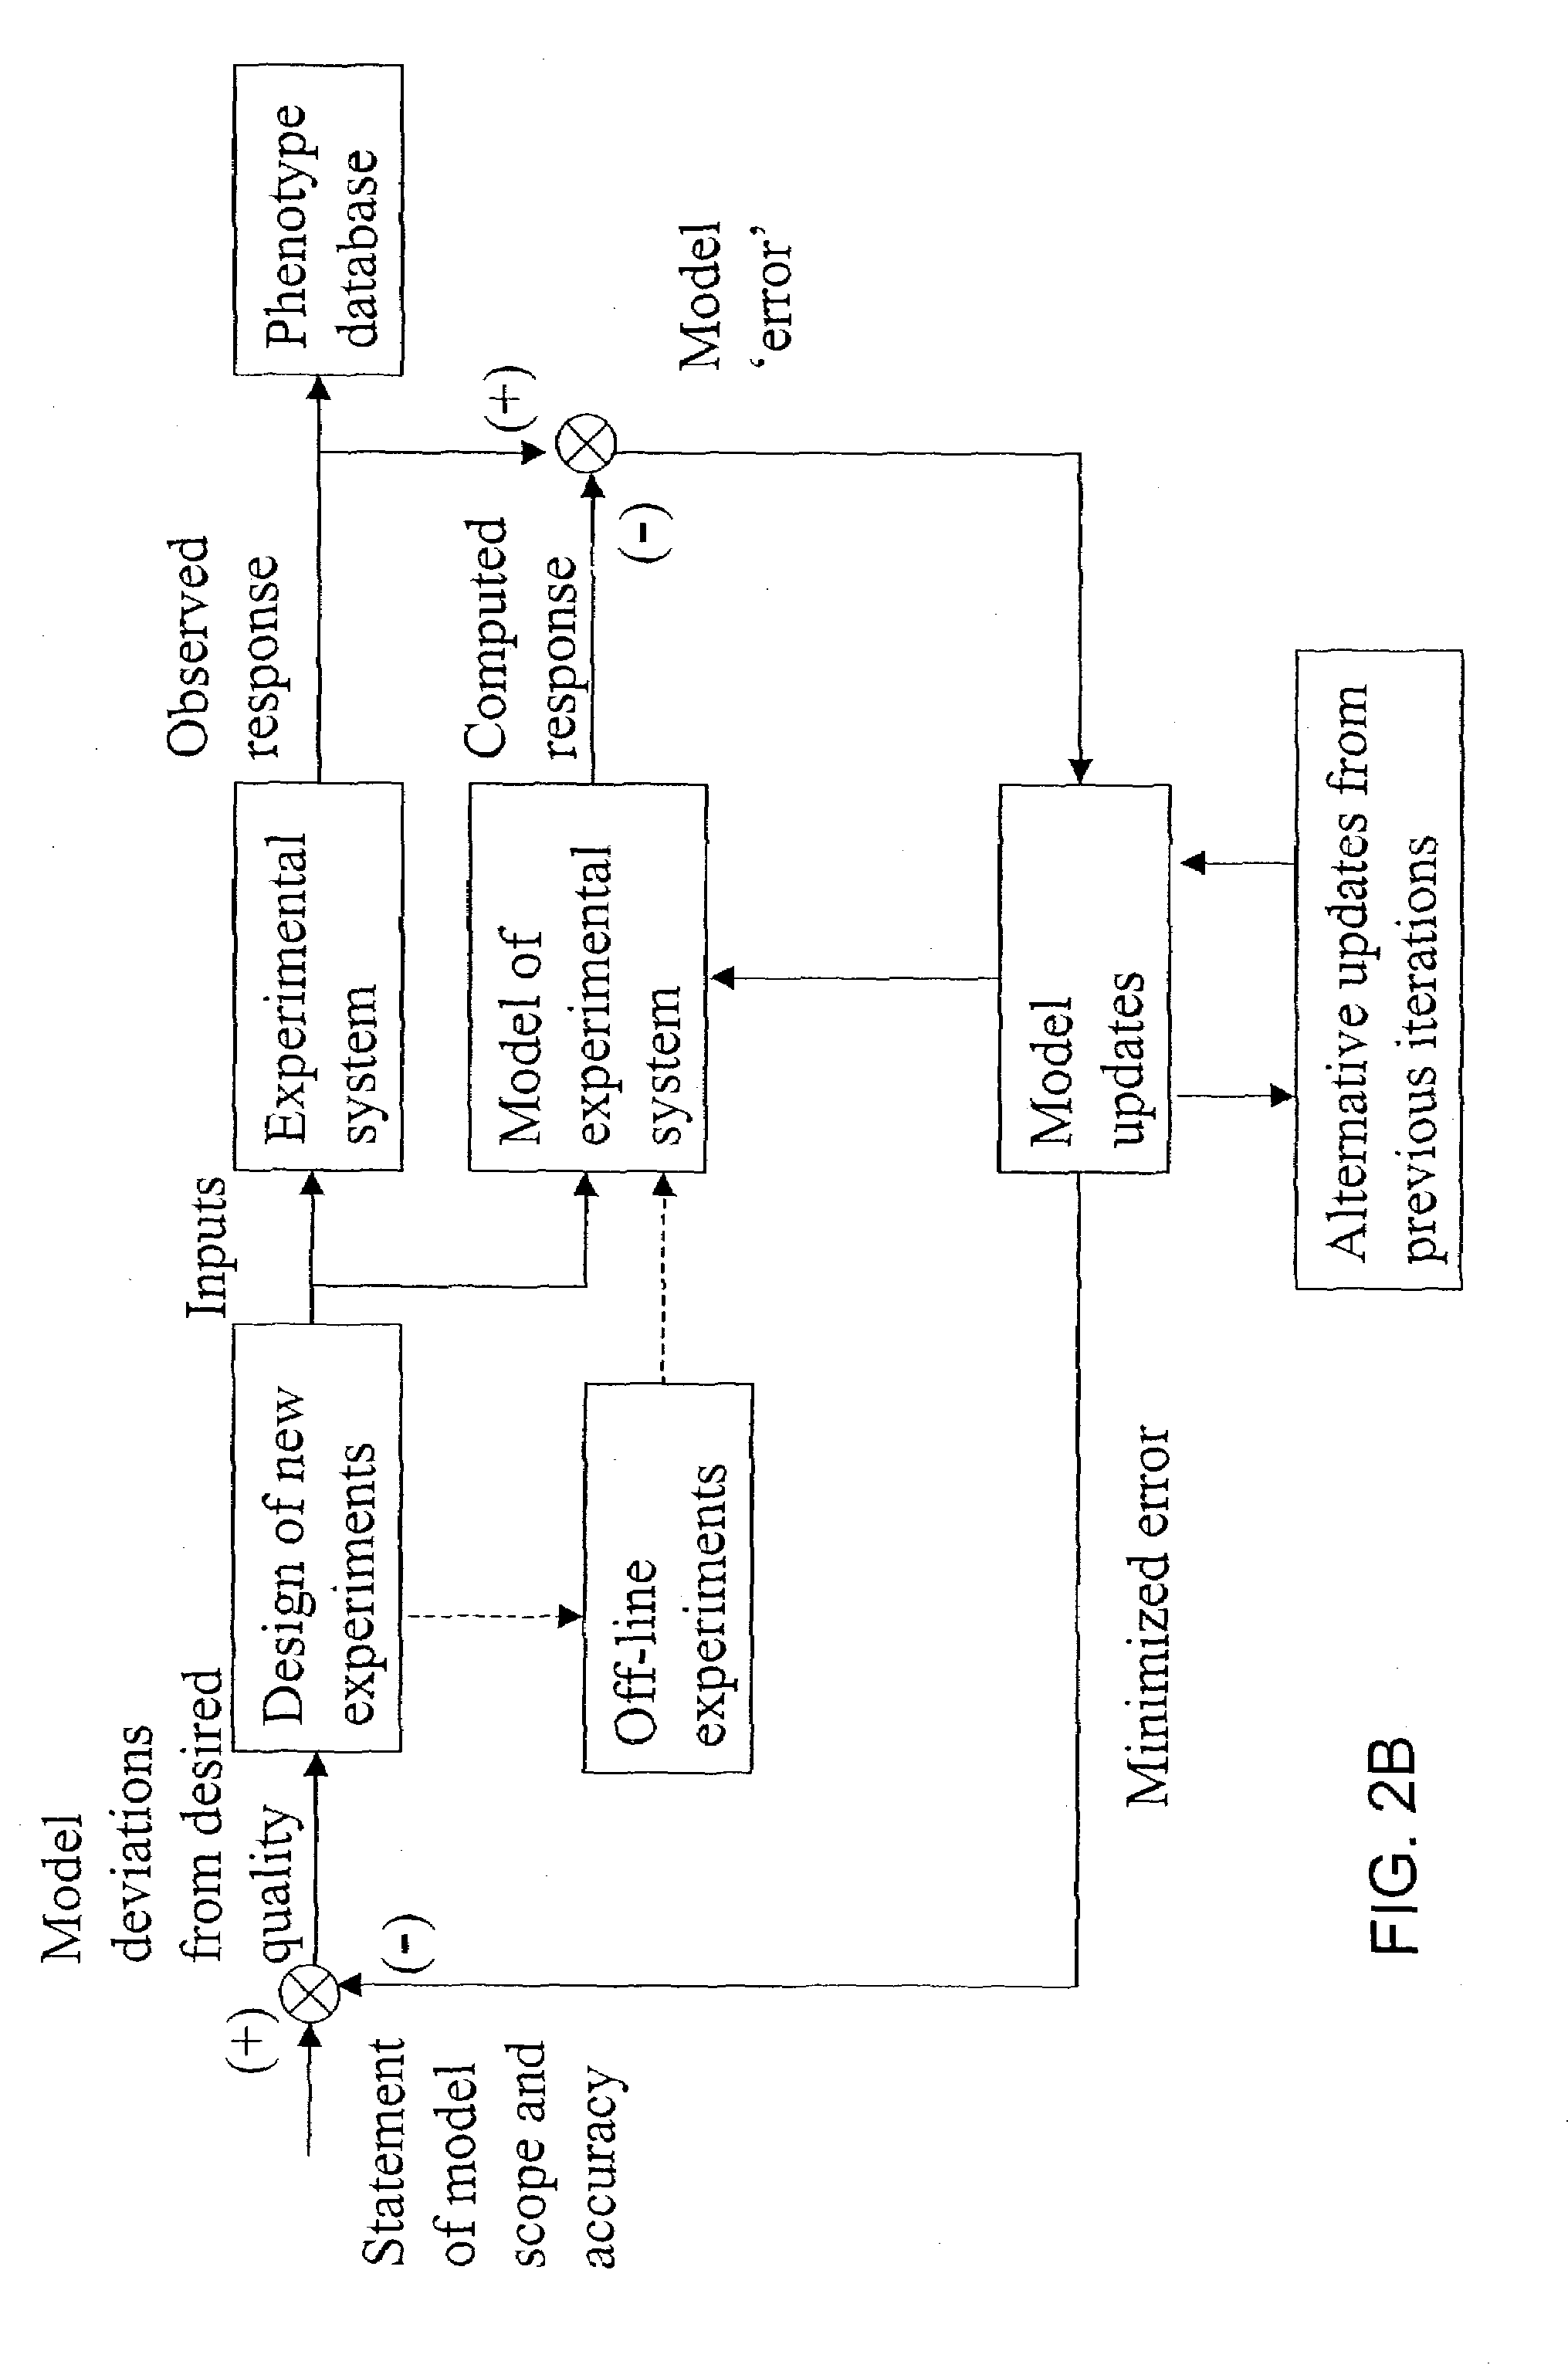 Methods and systems to identify operational reaction pathways